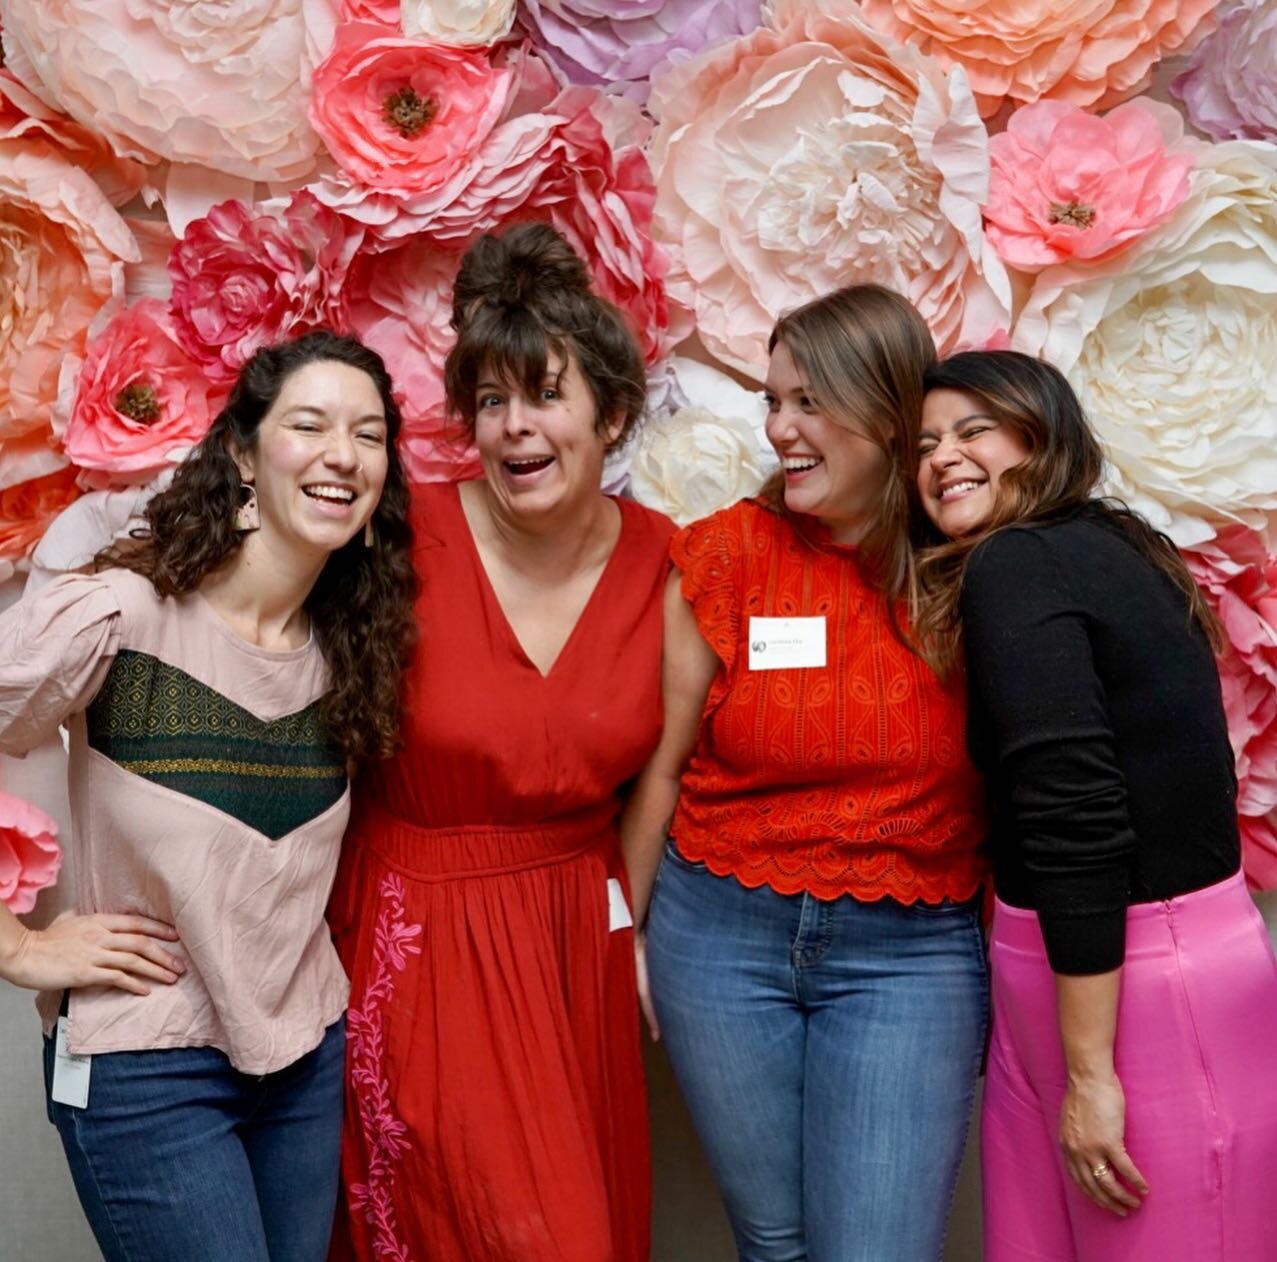 Monday was a BLAST! Thank you to all the GAL members and potential new members who came out to support GALentines in Austin💖 

Special thanks to @atlassian for sponsoring the catered food and gifting their stunning office for a couple of hours of ce